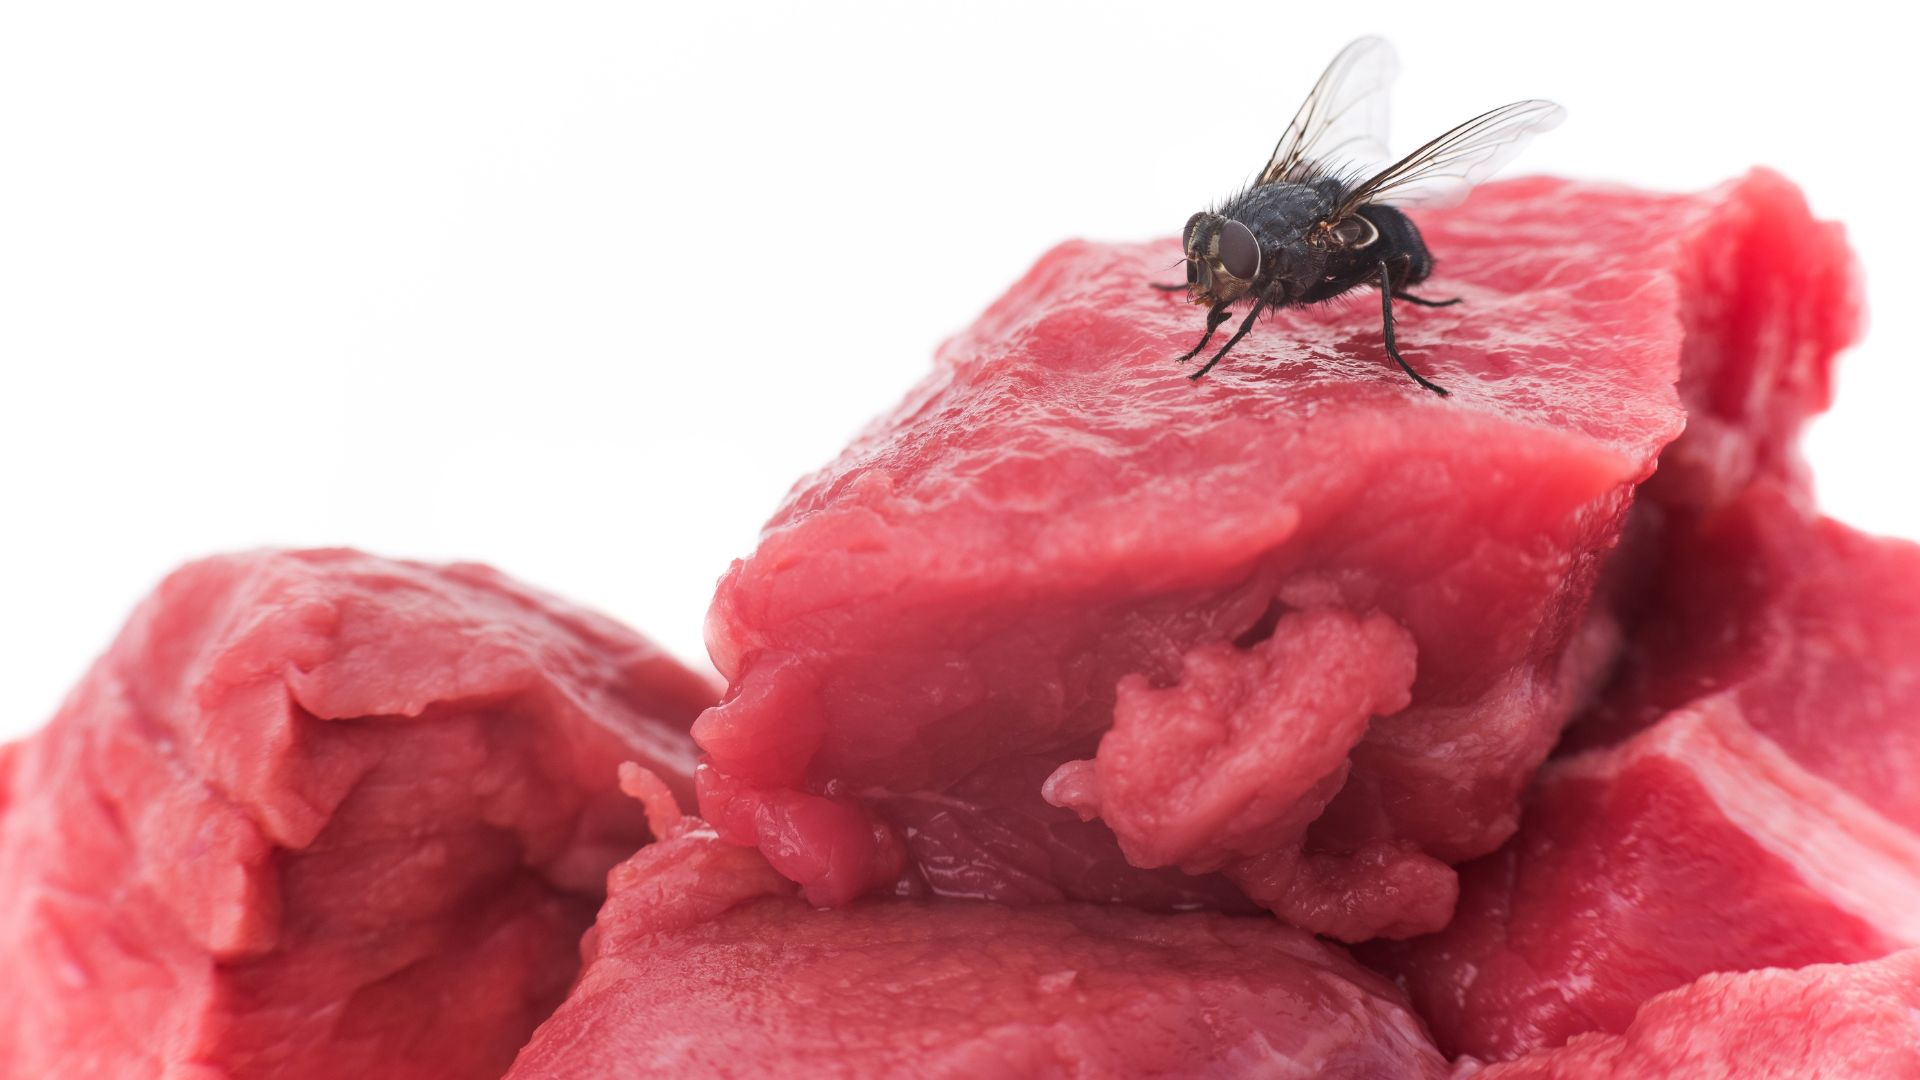 An image of a fly on red meat.